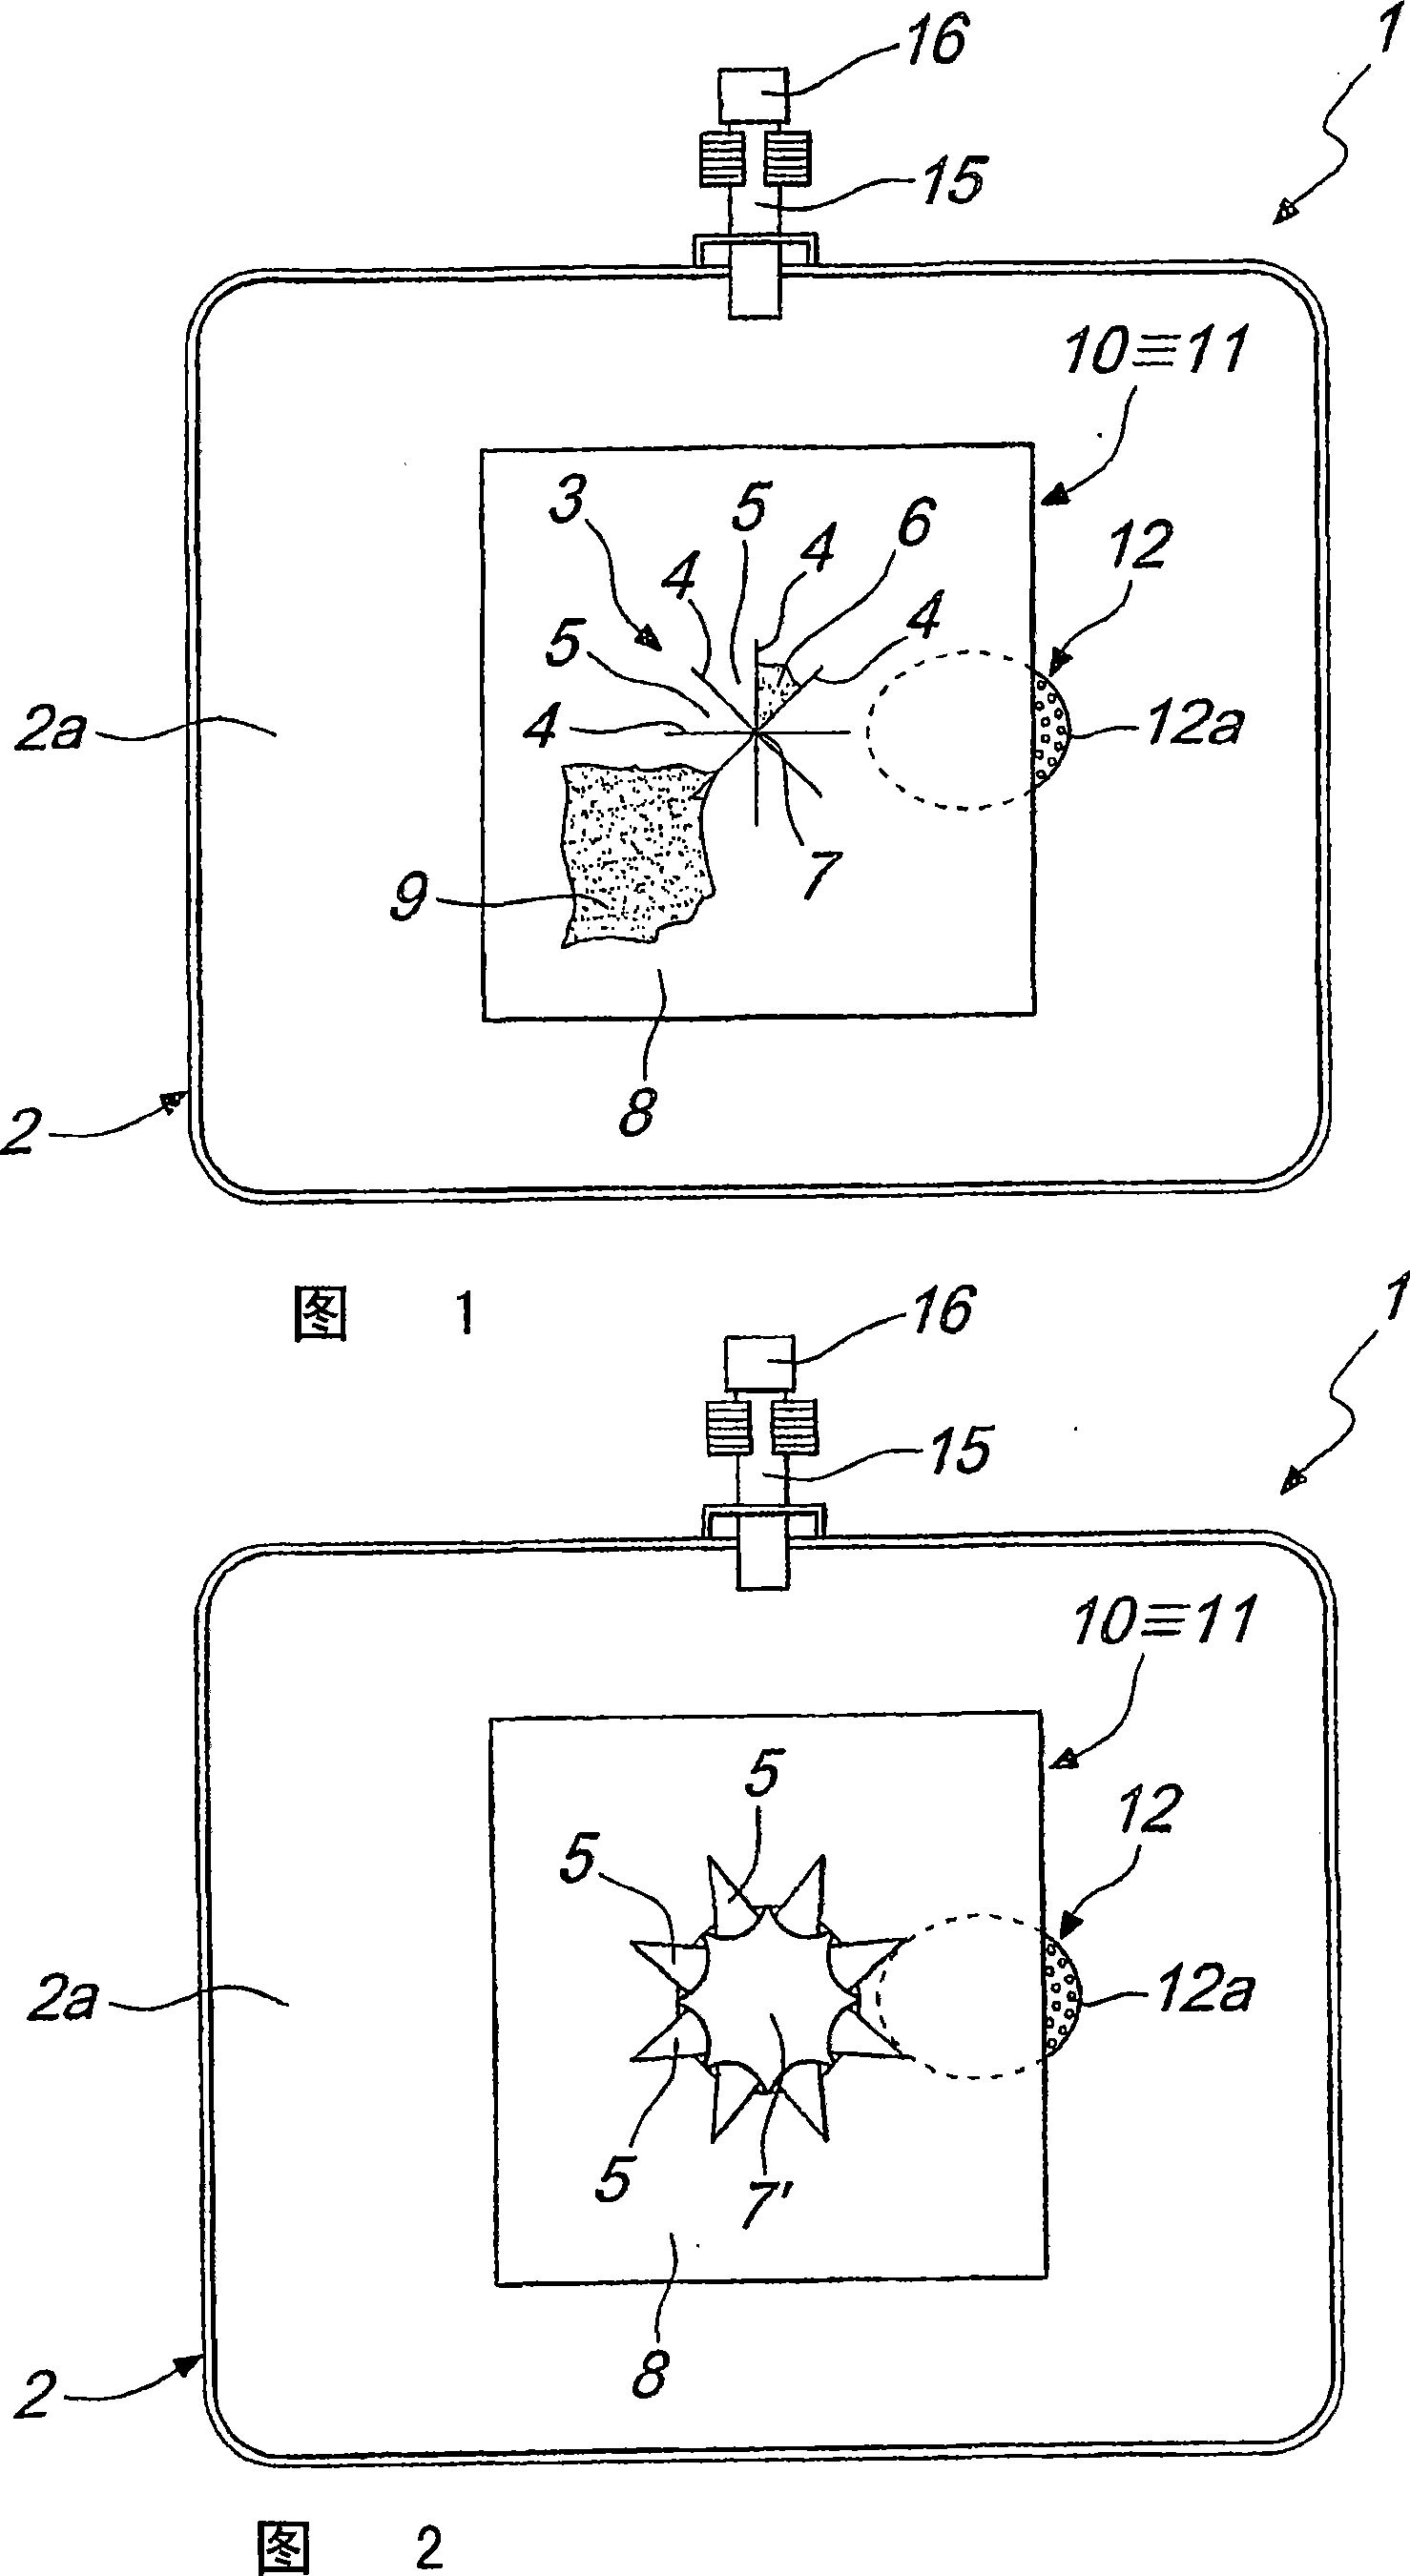 Container for collecting excretions, draining collections, purging ostomies or the like